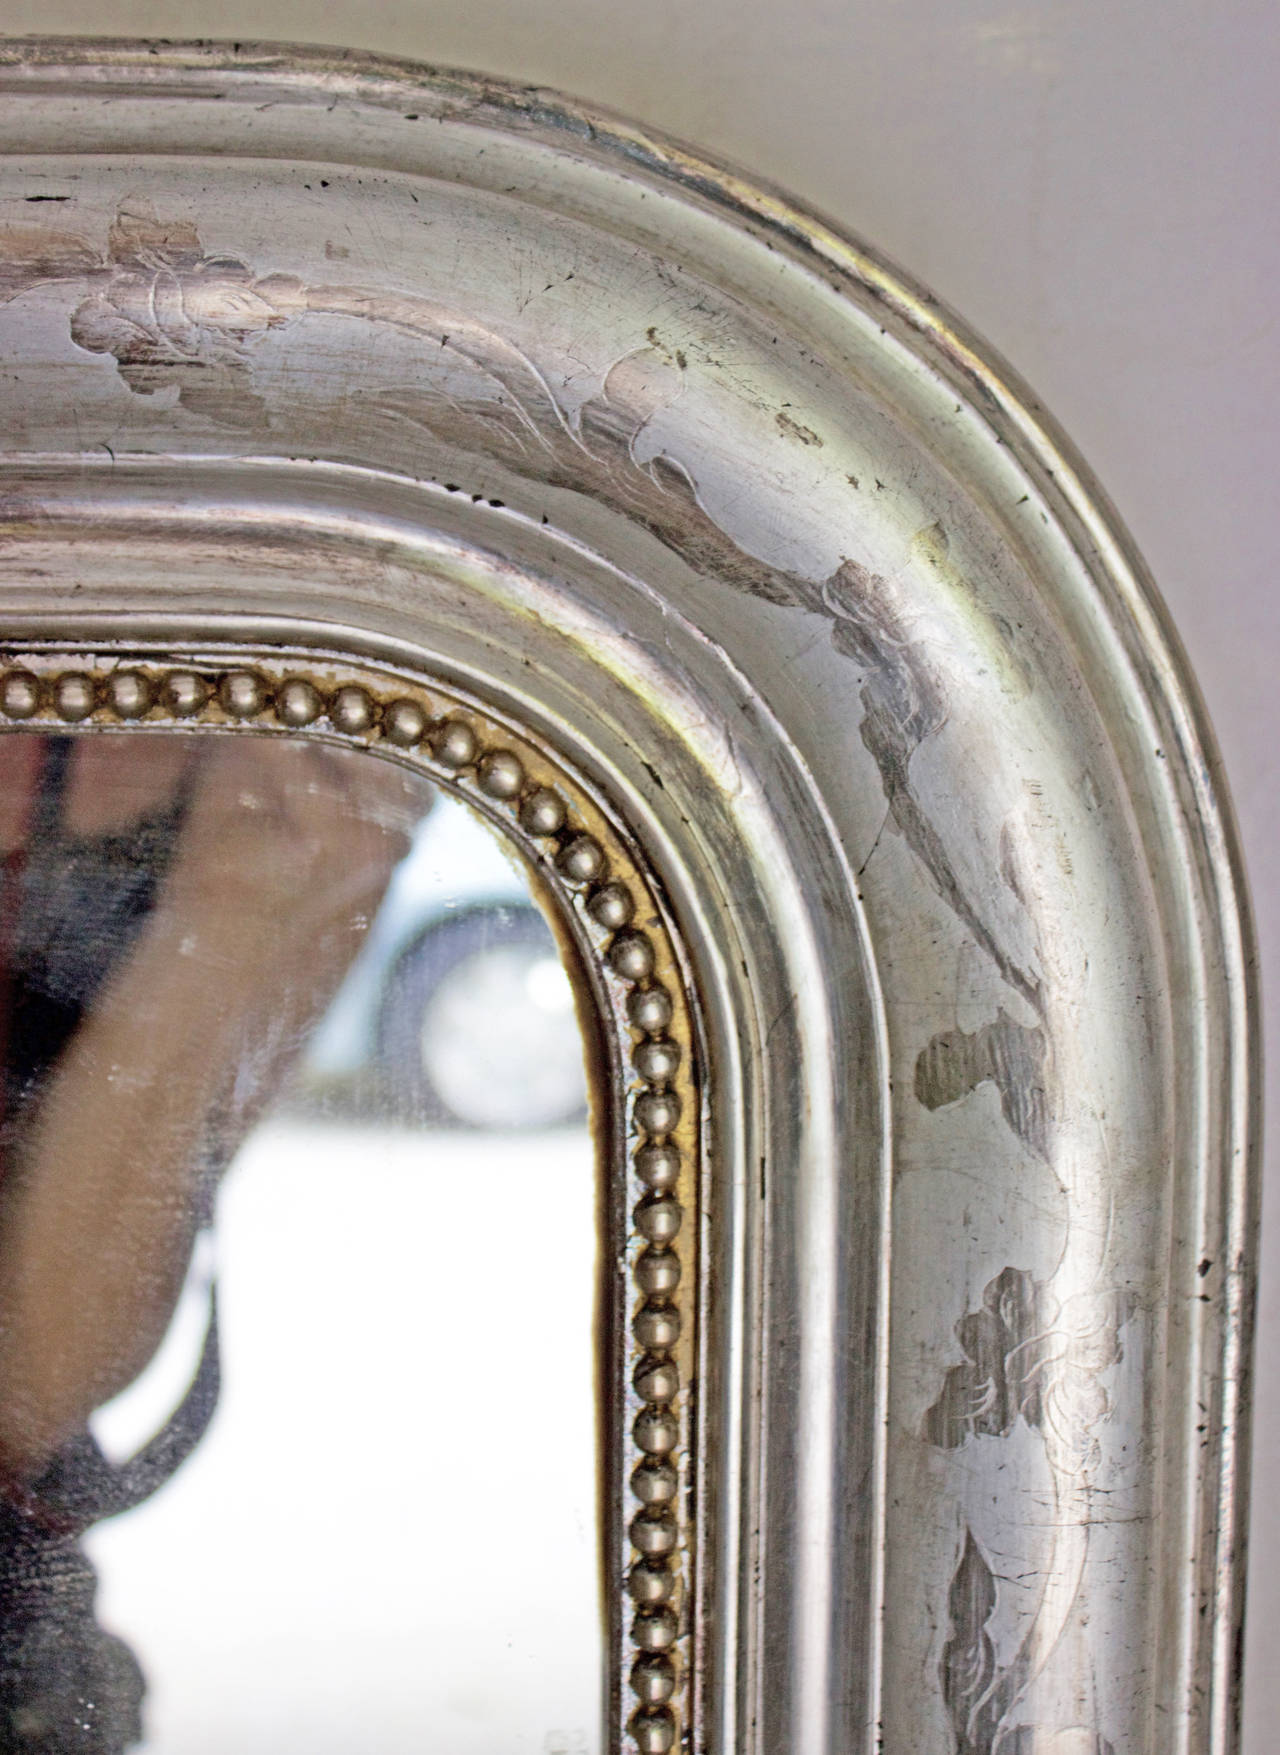 Rounded edges at the top and a row of silvered wooden pearls around three sides of the glass.This mirror has its original silver leafed gilt frame with a light and mat subtle foliage incised pattern all around except the bottom part, as it should be